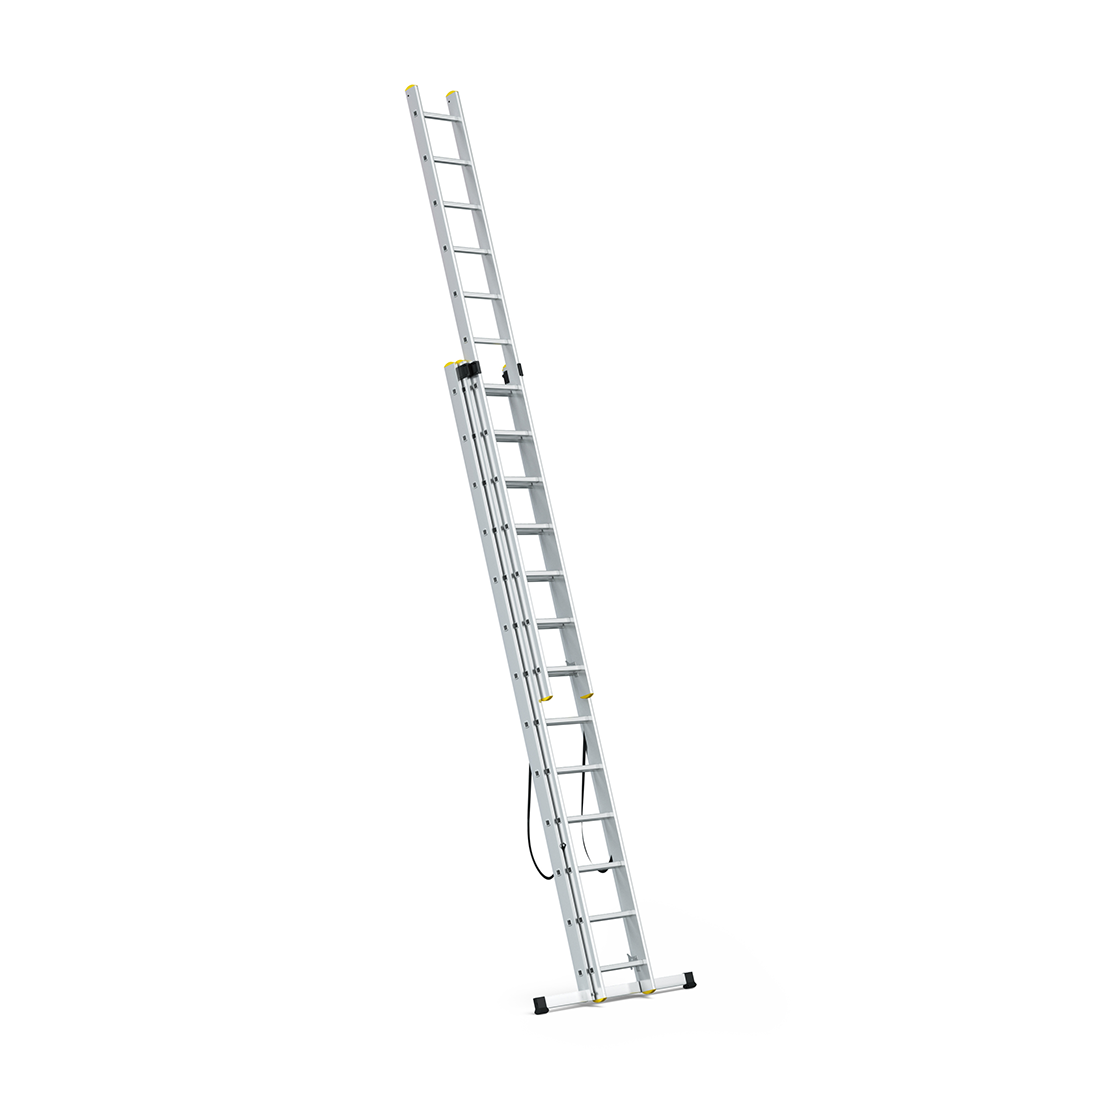 28 ft. Reach Flexi Pro Type IA Aluminum Combination 3-section Ladder - 330 lbs. Load Capacity